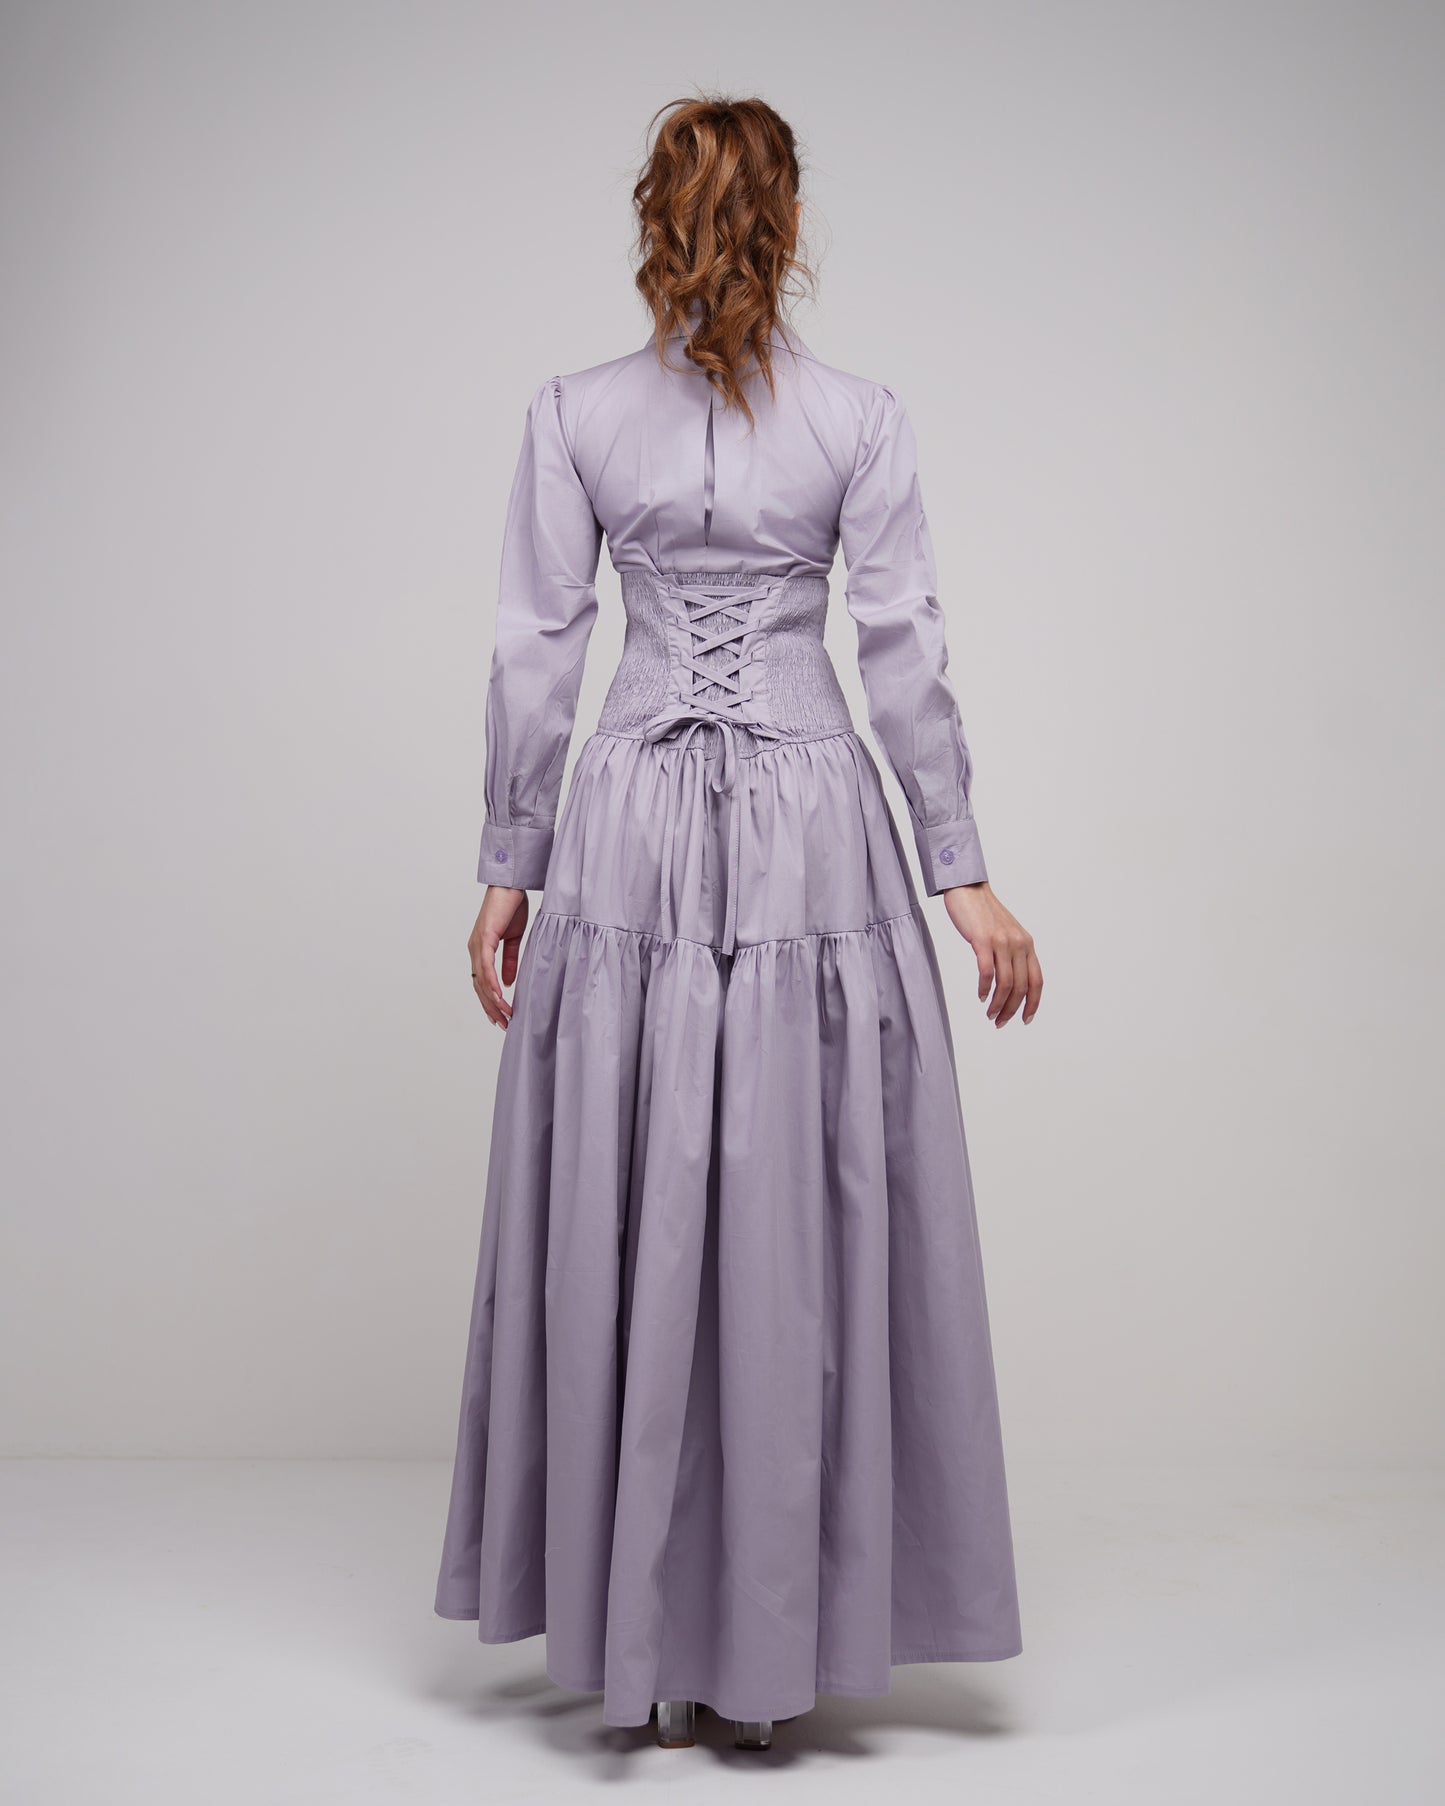 Grey purple maxi dress with back strapped belt effect